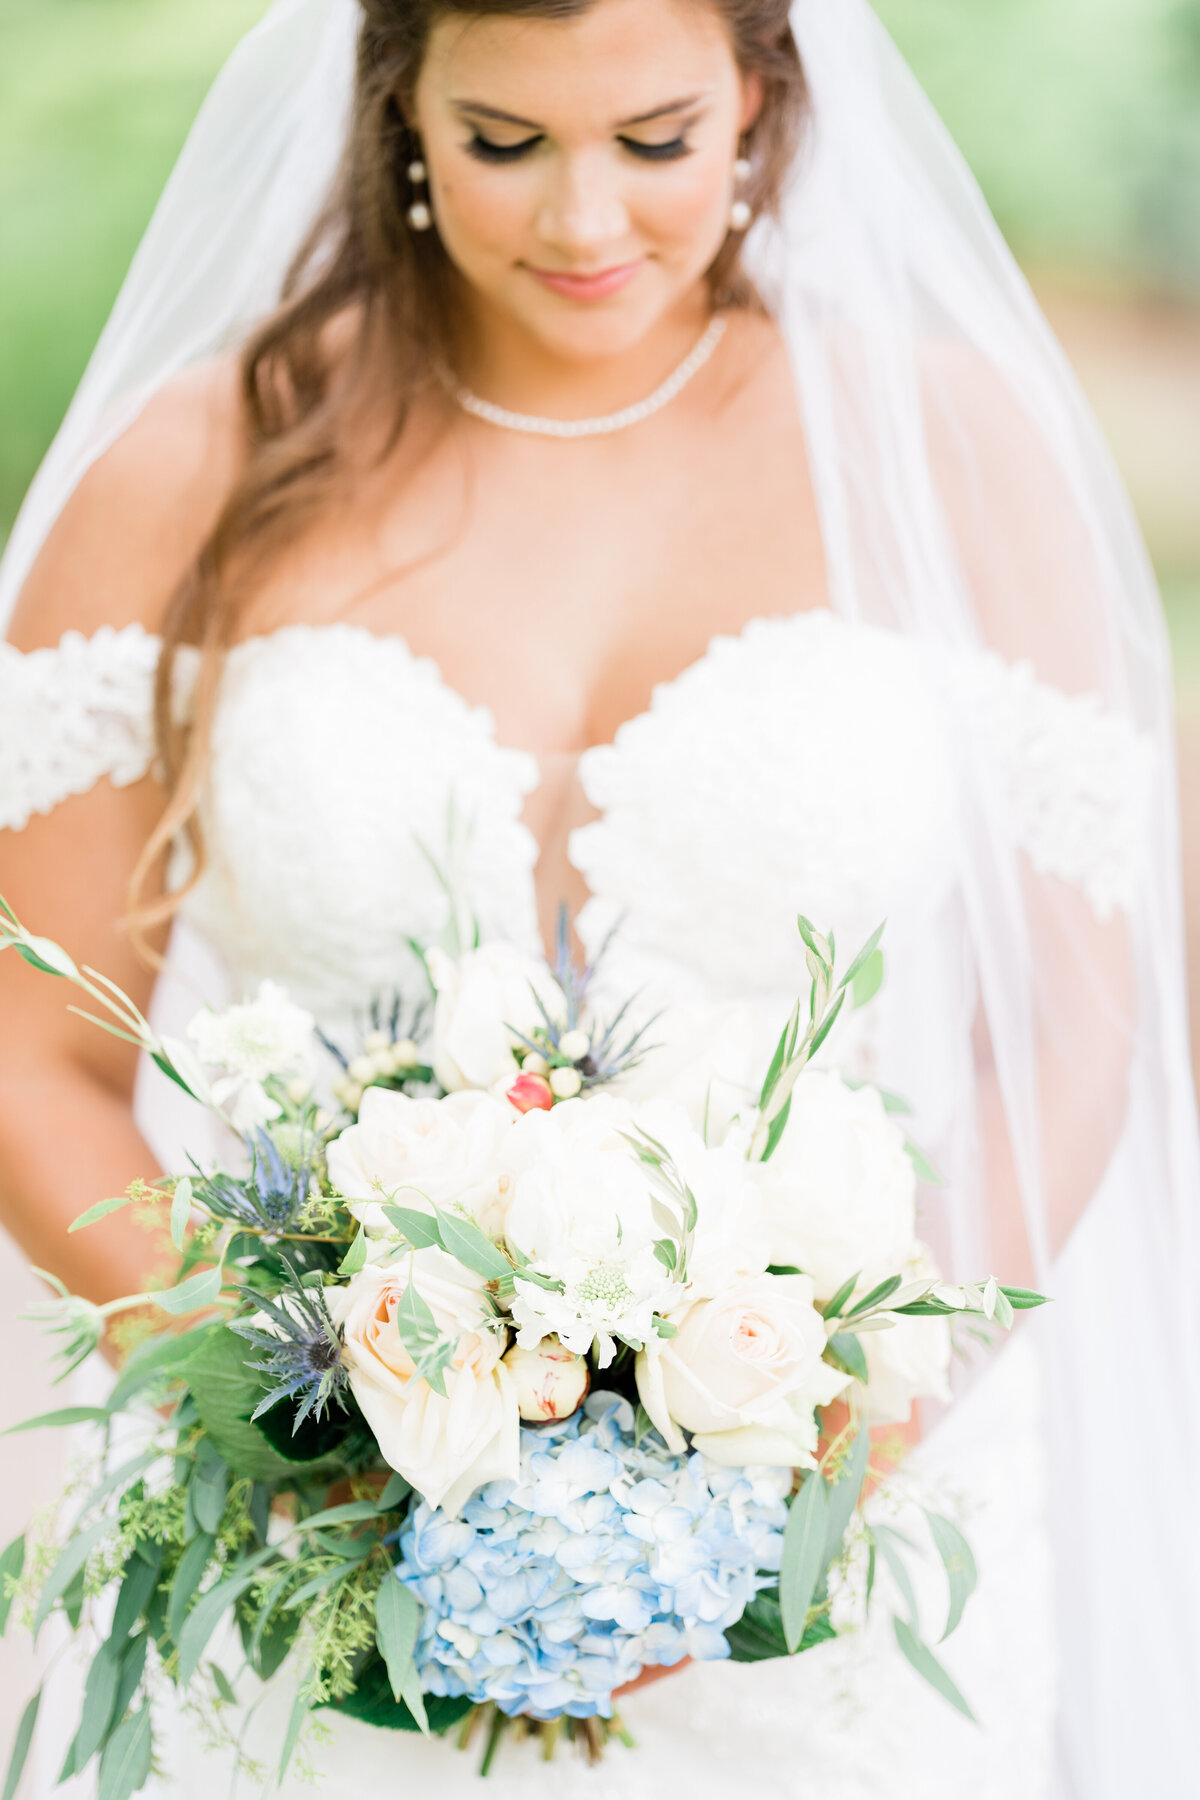 Bride looking down at white and blue bouquet